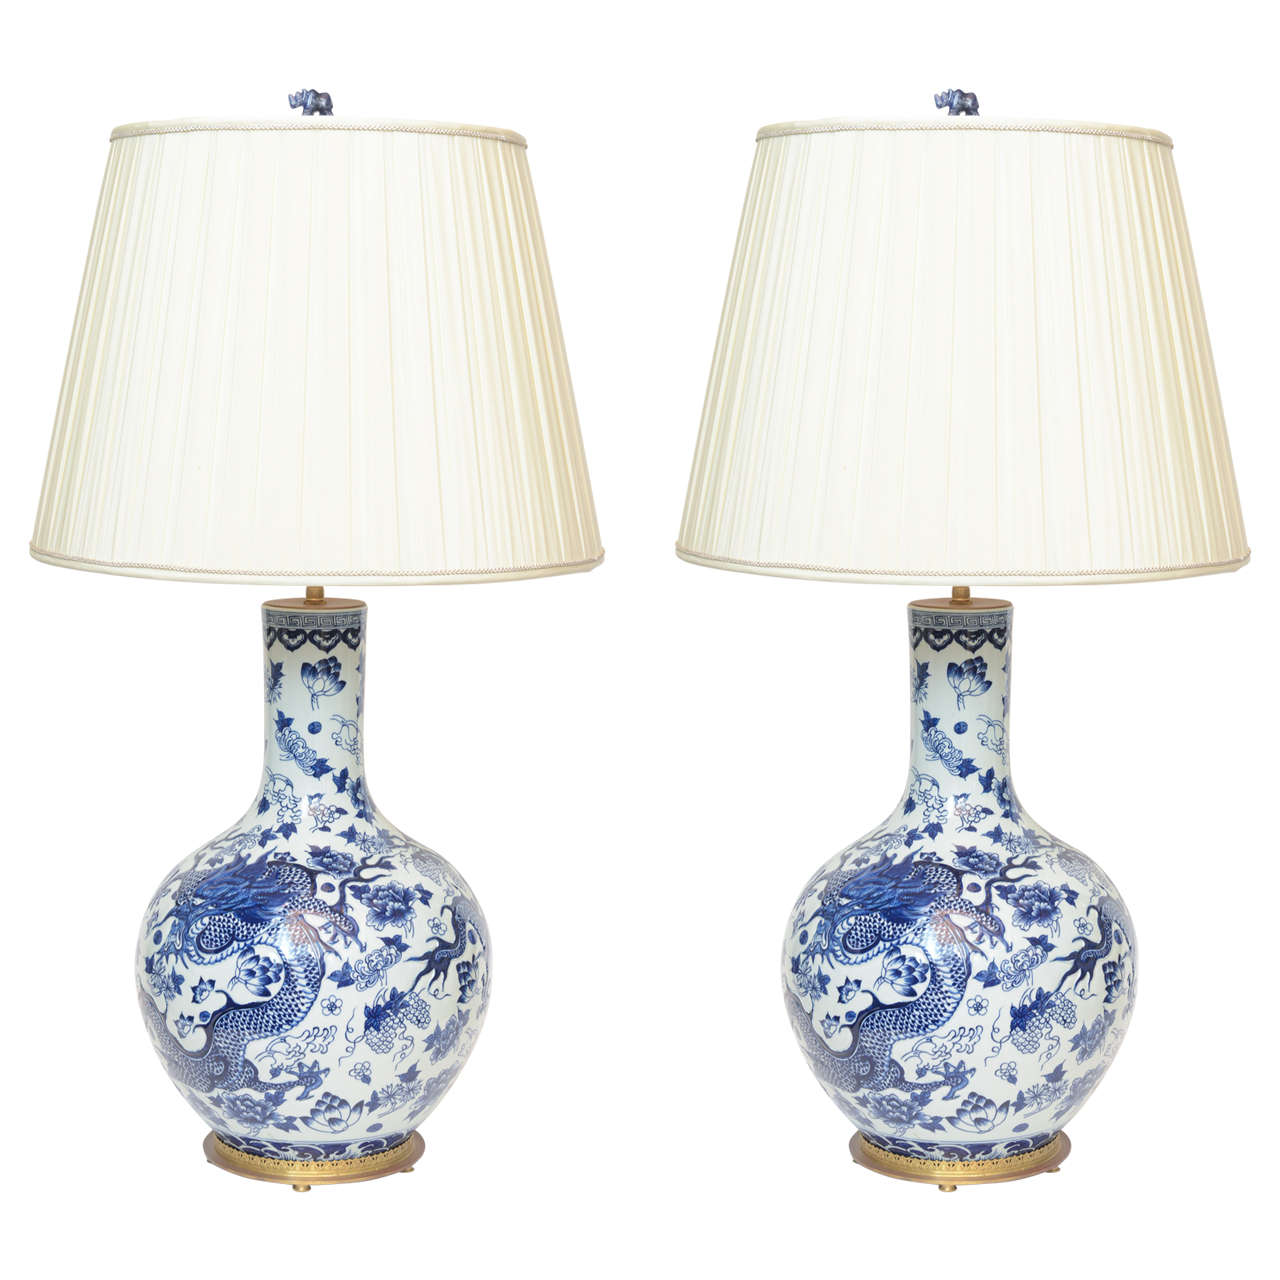 Pair of Chinese Porcelain Raised Relief Dragon Bottle Shaped Lamps